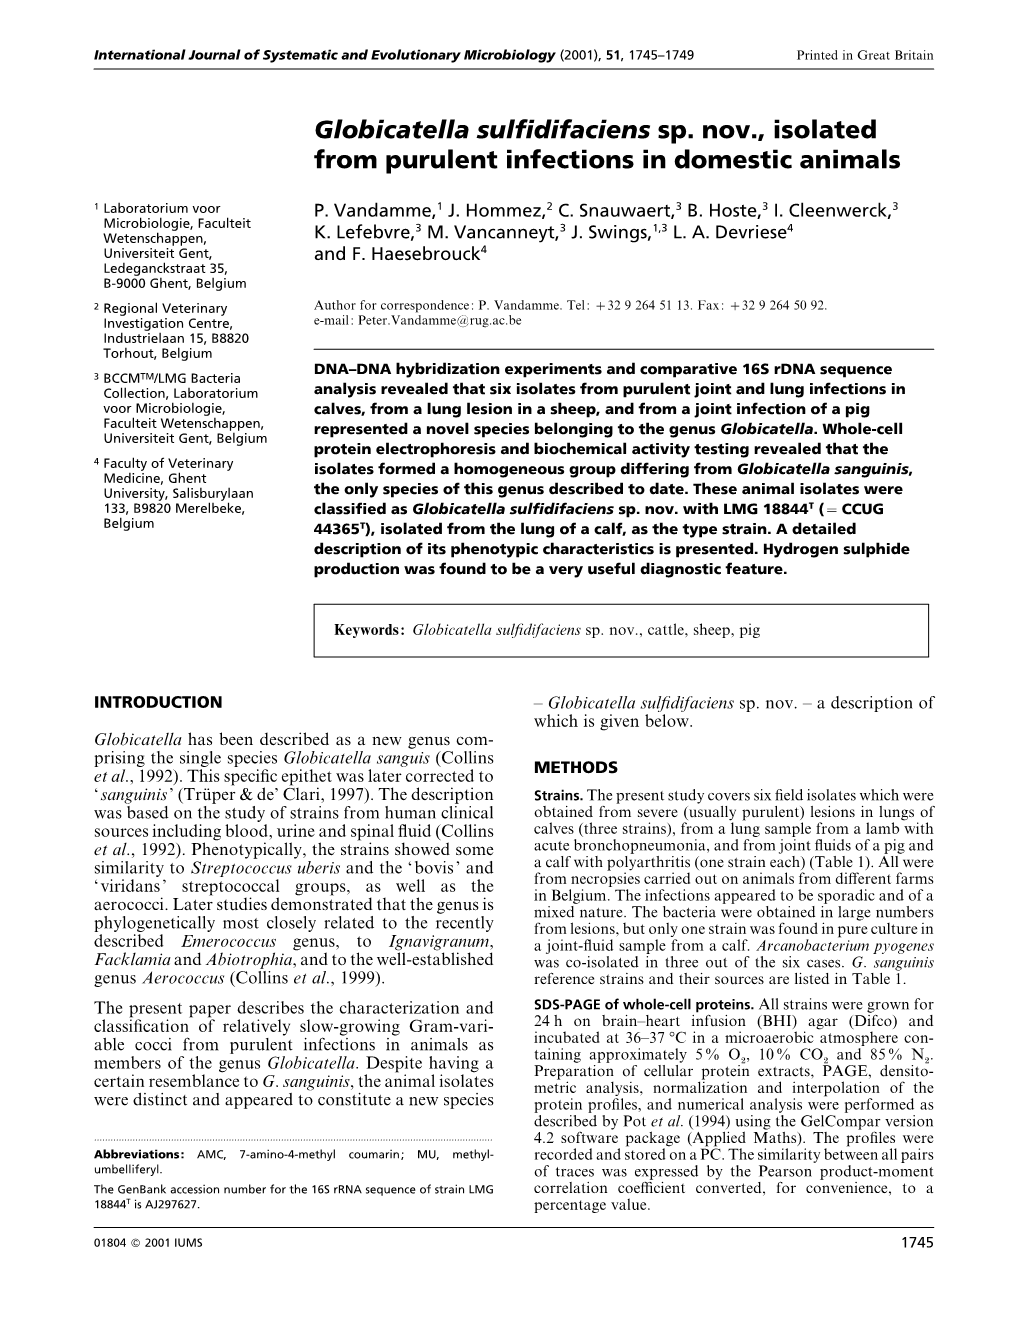 Globicatella Sulfidifaciens Sp. Nov., Isolated from Purulent Infections in Domestic Animals